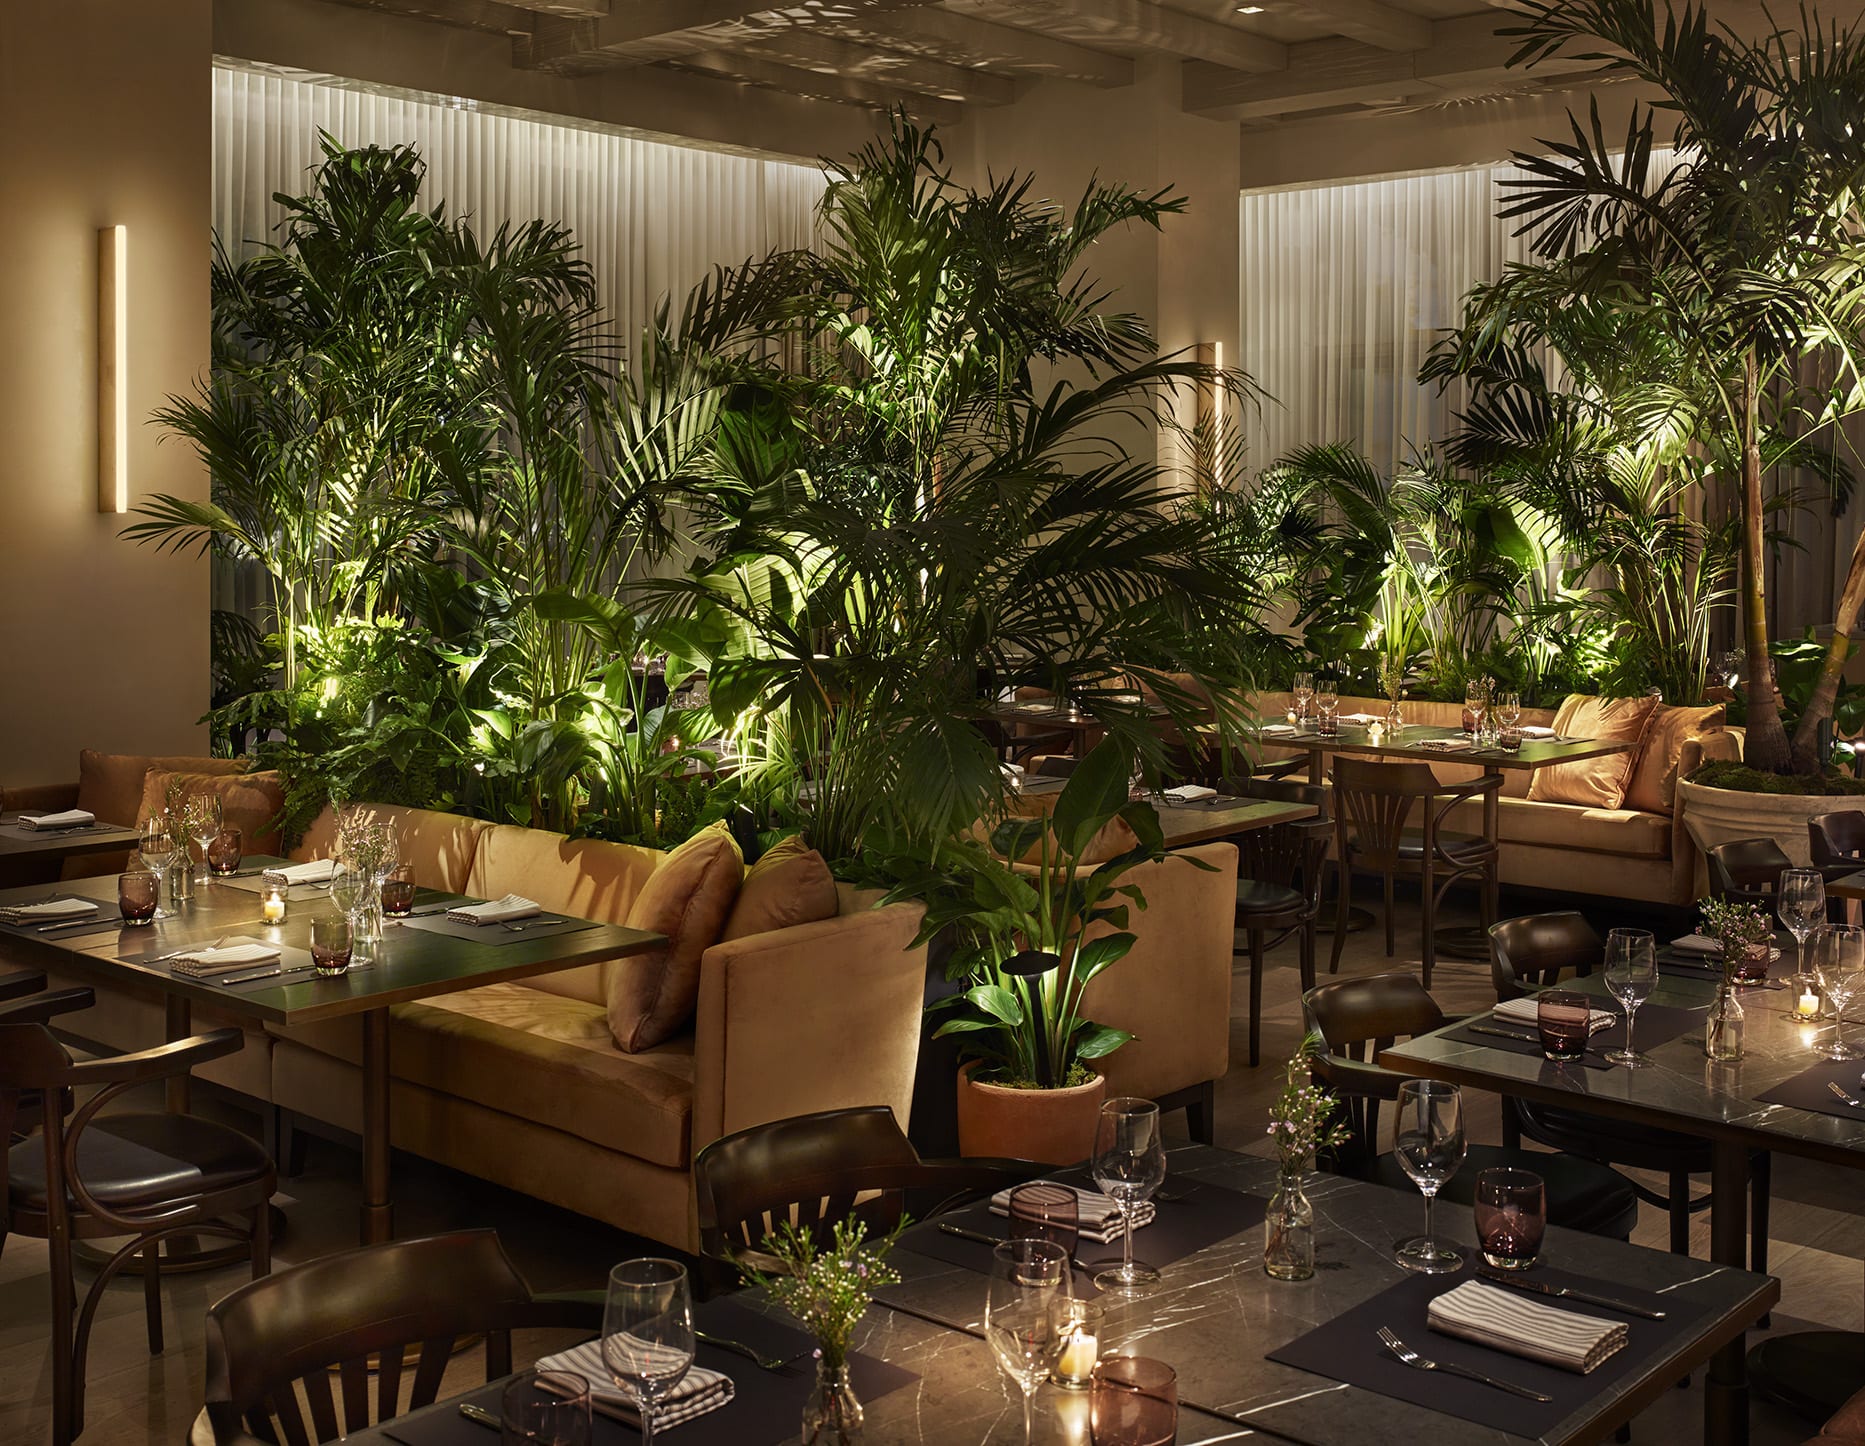 Cozy, candlelit dining are with tropical foliage